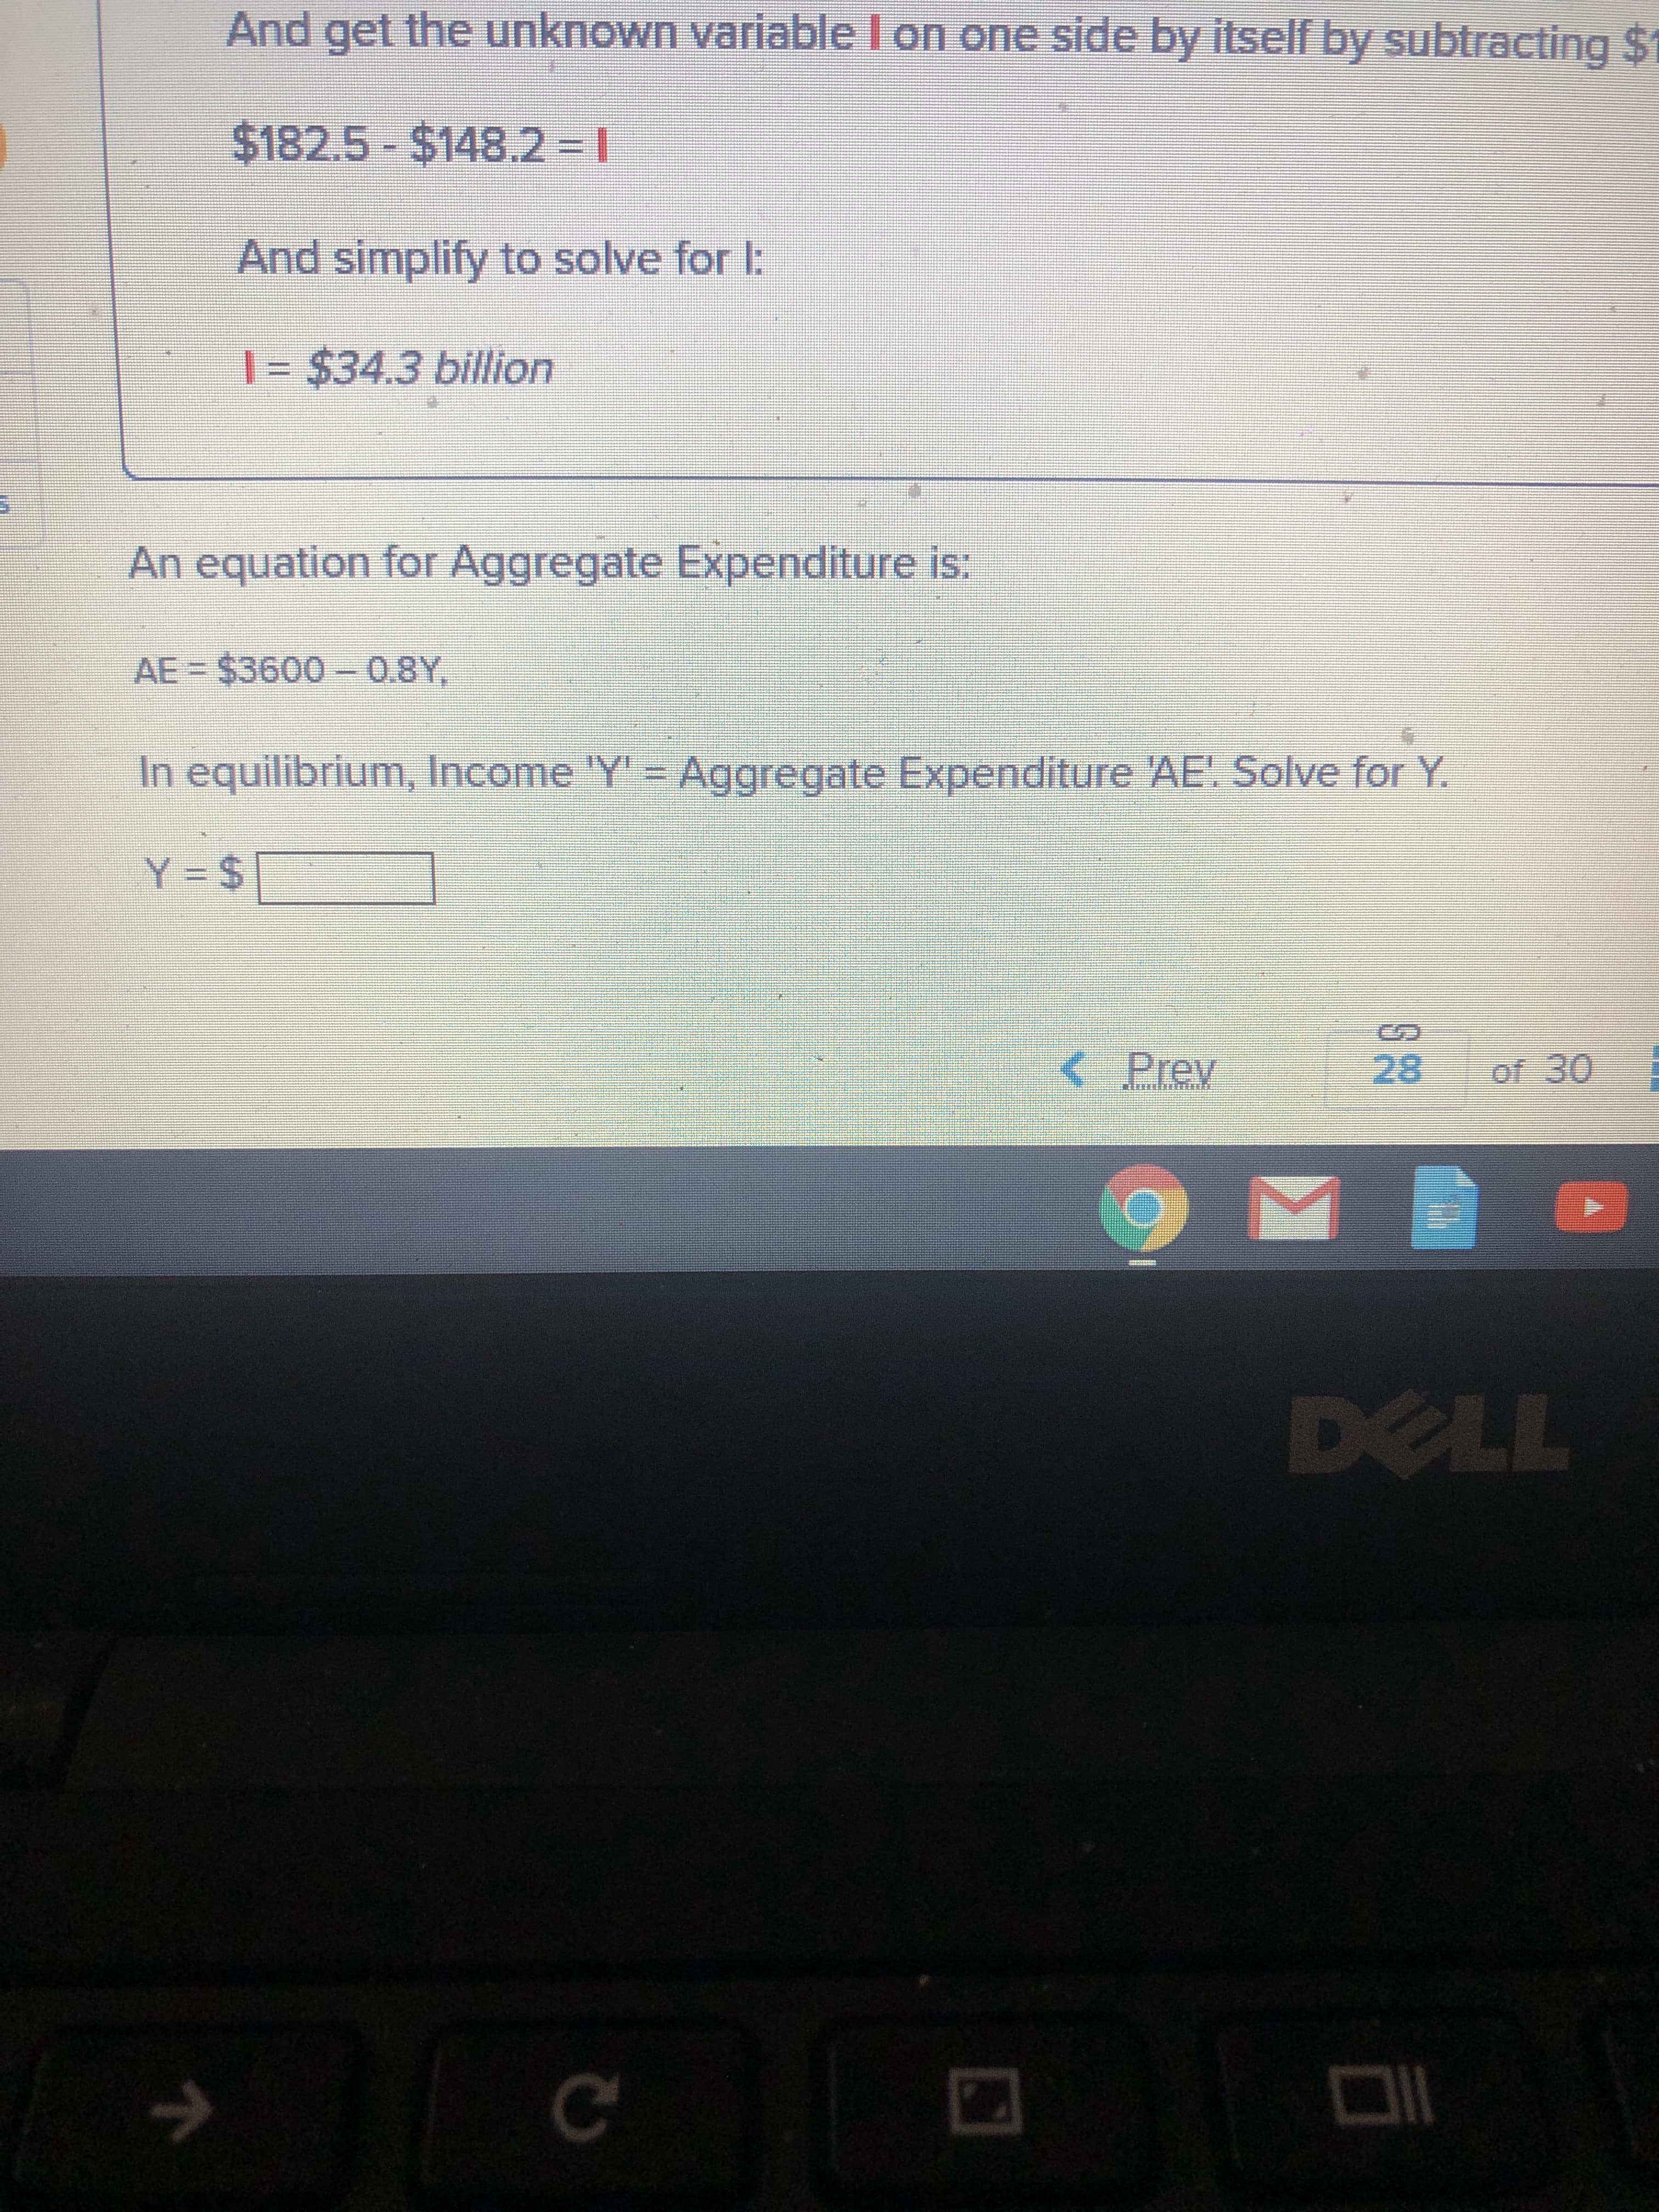 An equation for Aggregate Expenditure is:
AE = $3600 0.8Y,
In equilibrium, Income 'Y' = Aggregate Expenditure 'AE! Solve for Y.
Y $
